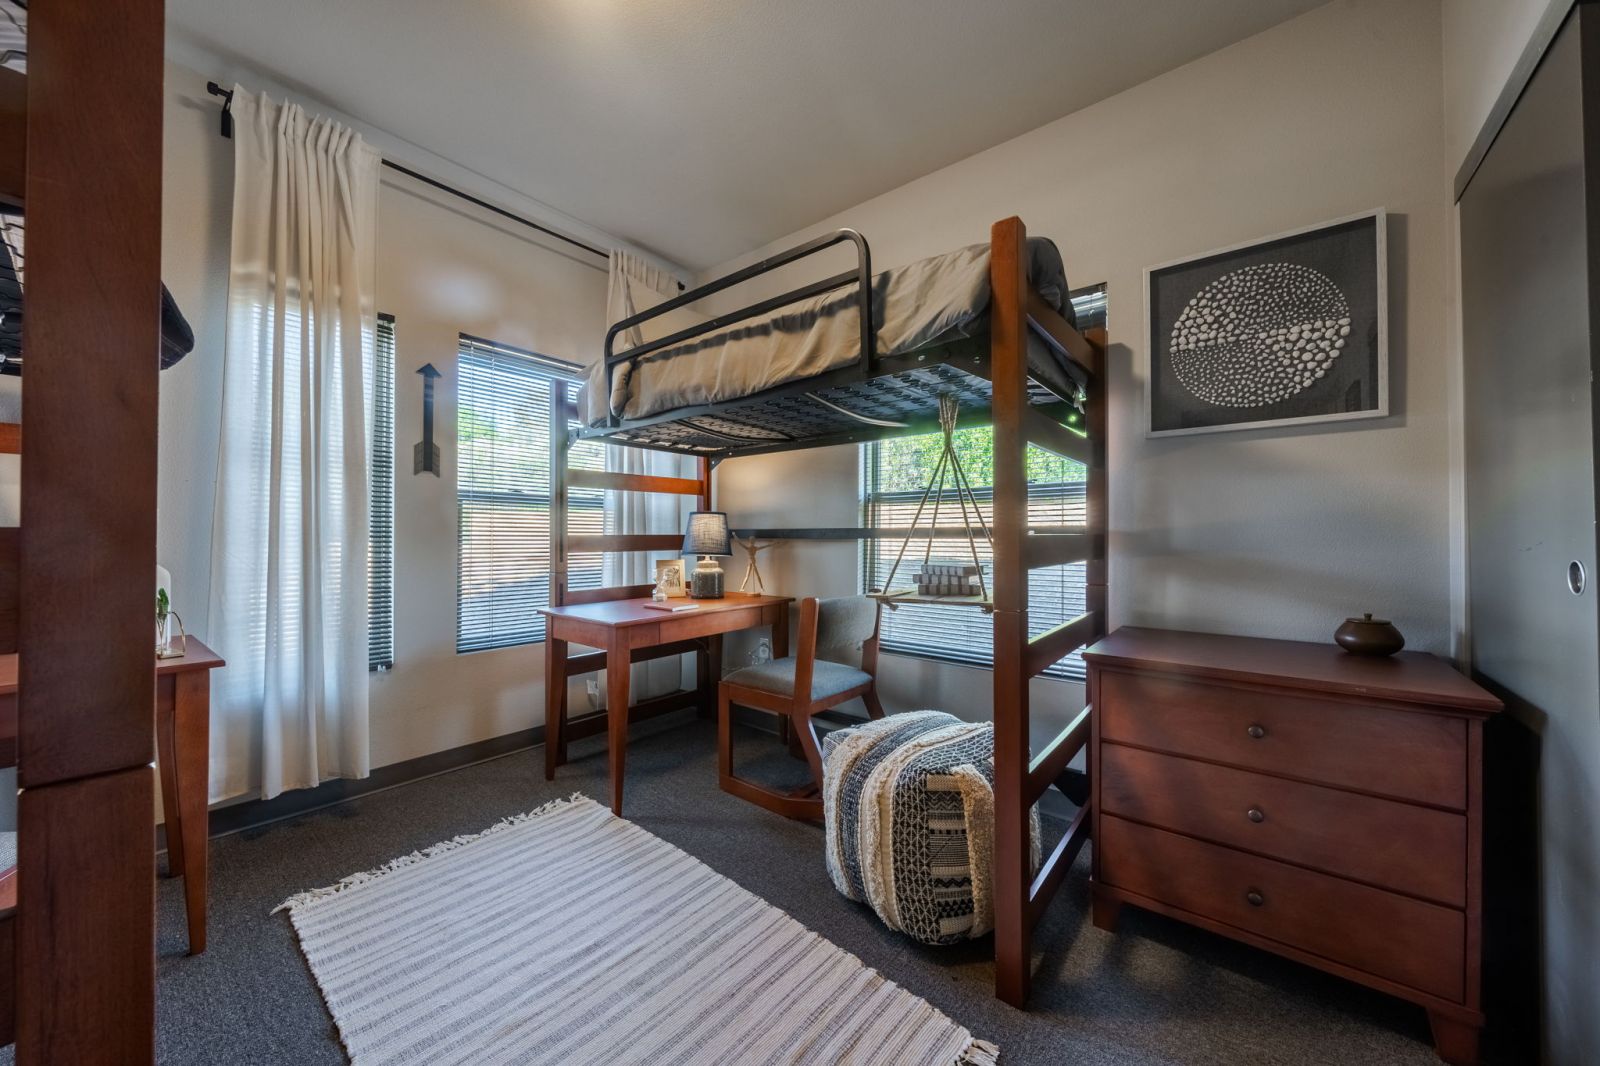 claremont collegiate furnished claremont student apartments shared bunkbed room